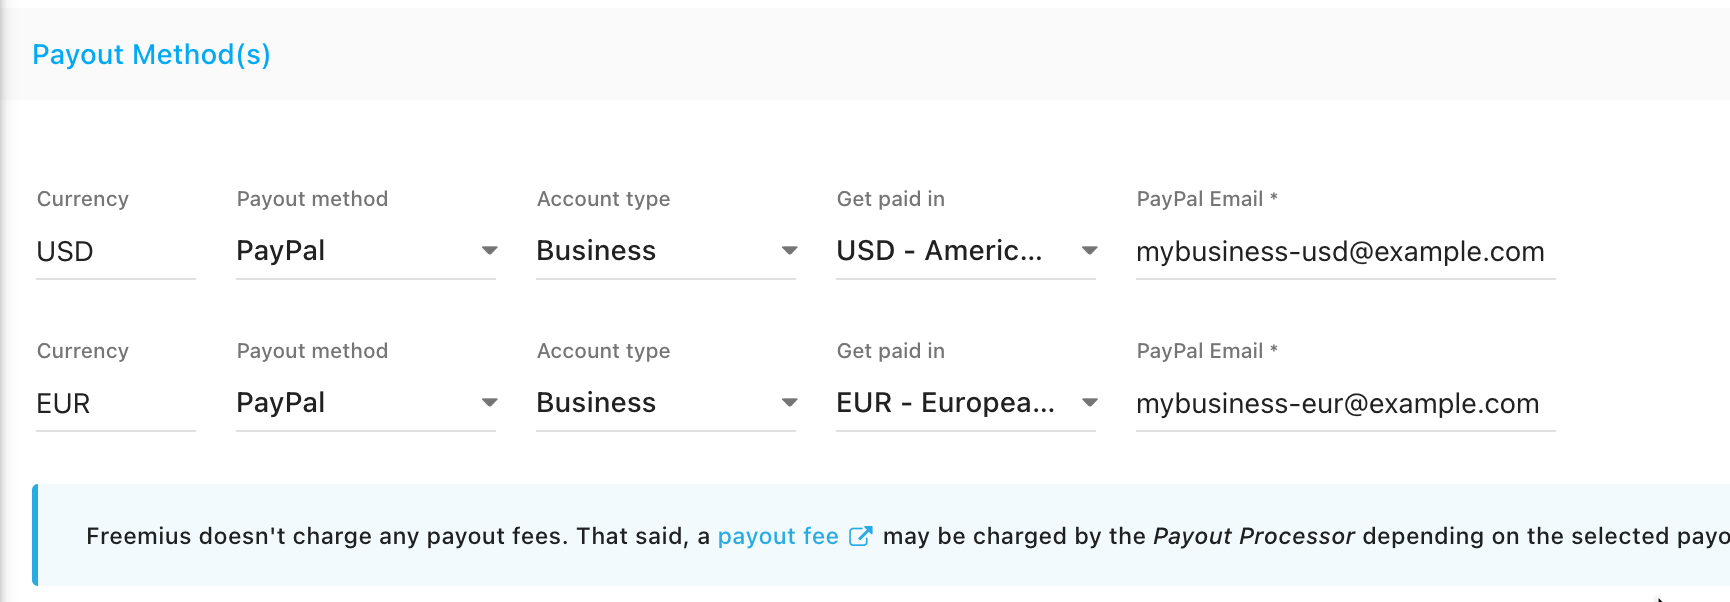 Setting up multi-currency payout method Freemius